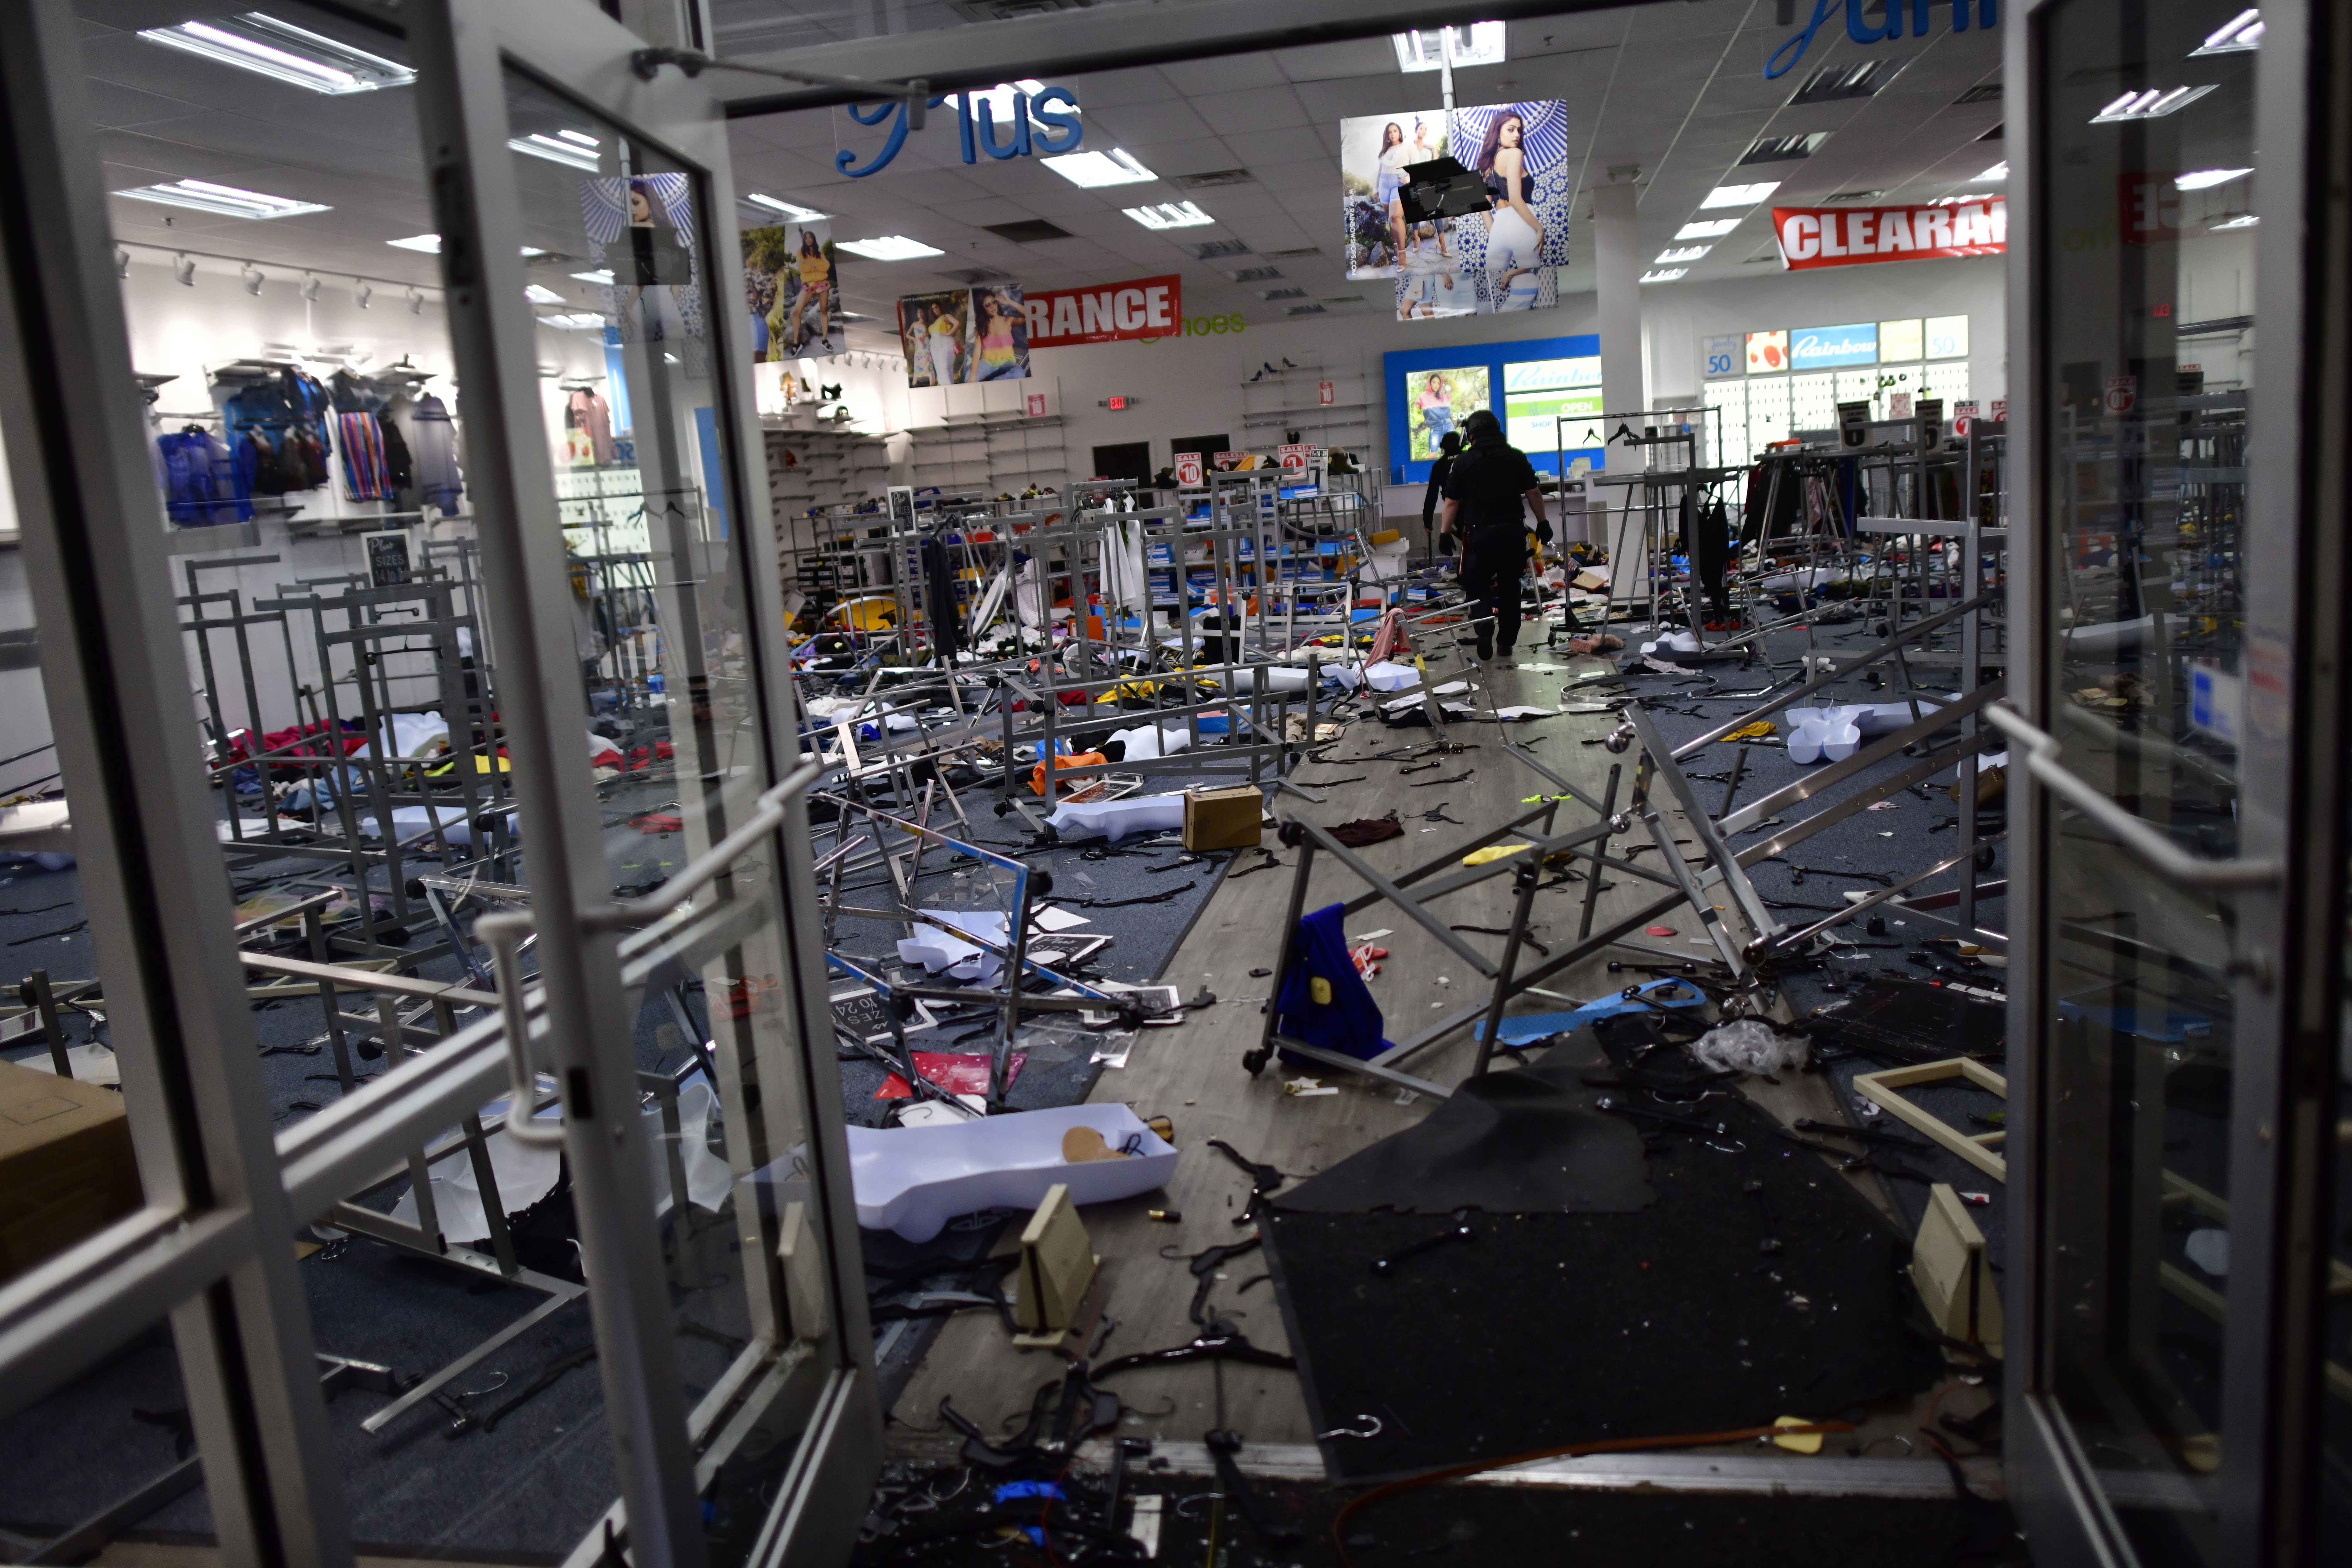 Police investigate a looted clothing store during widespread unrest following the death of George Floyd on May 31, 2020 in Philadelphia, Pennsylvania. (Photo by Mark Makela/Getty Images)